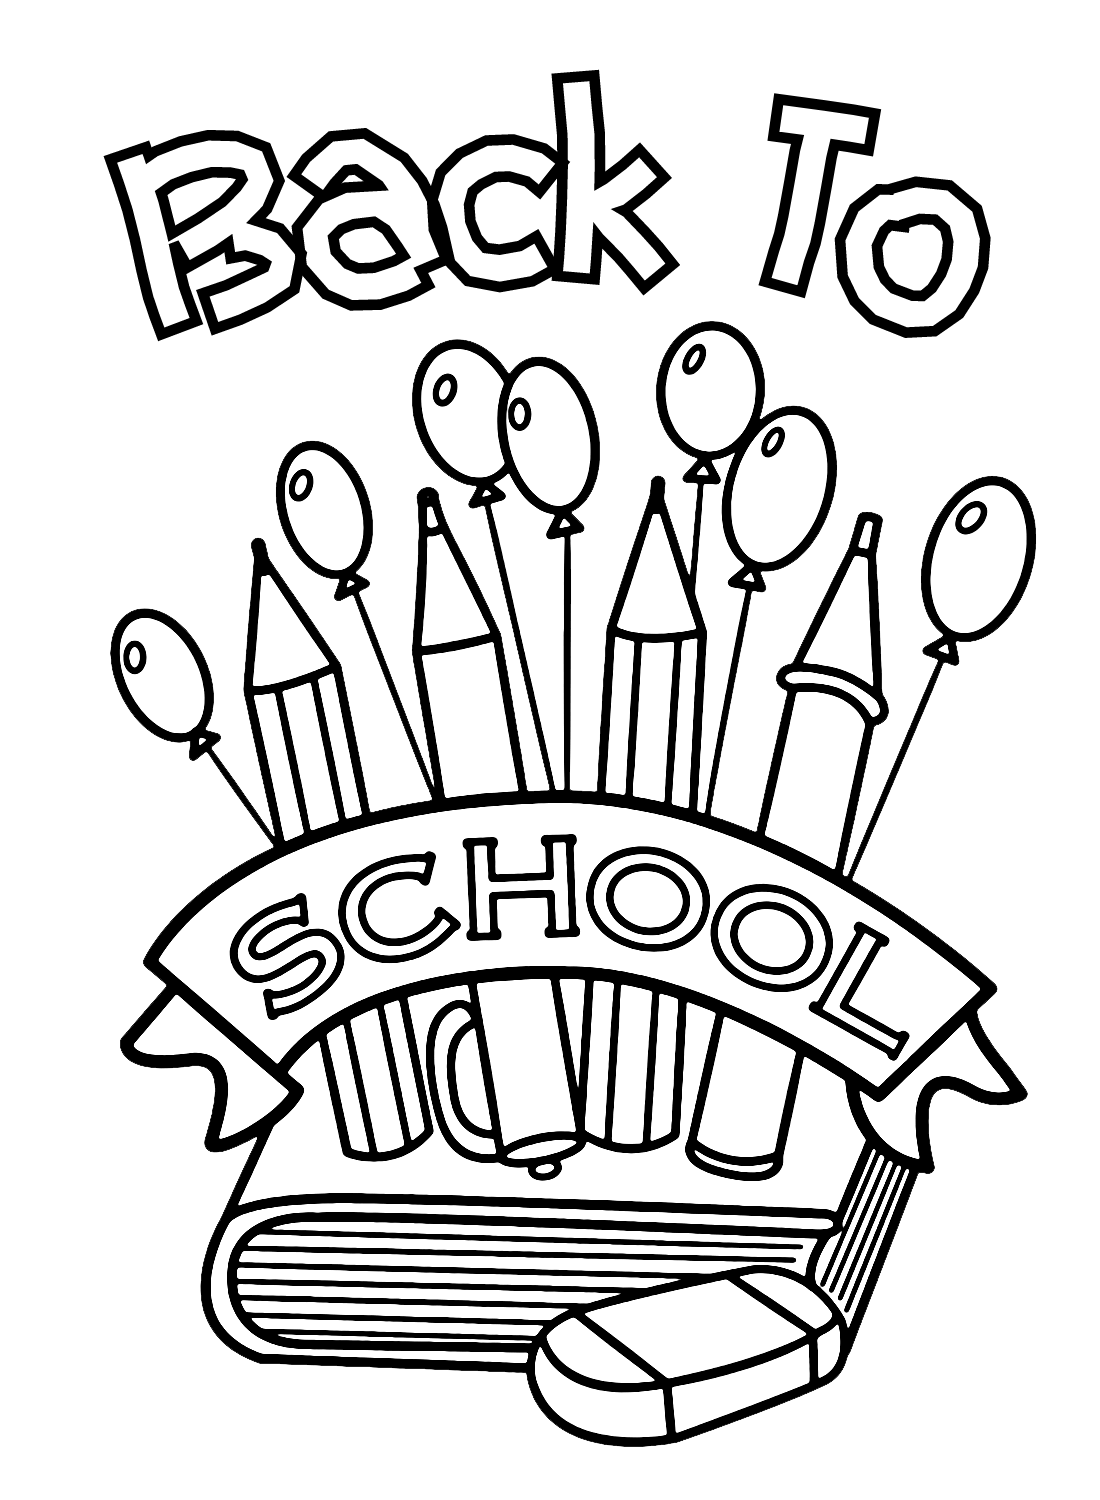 Coloring Page Back to School